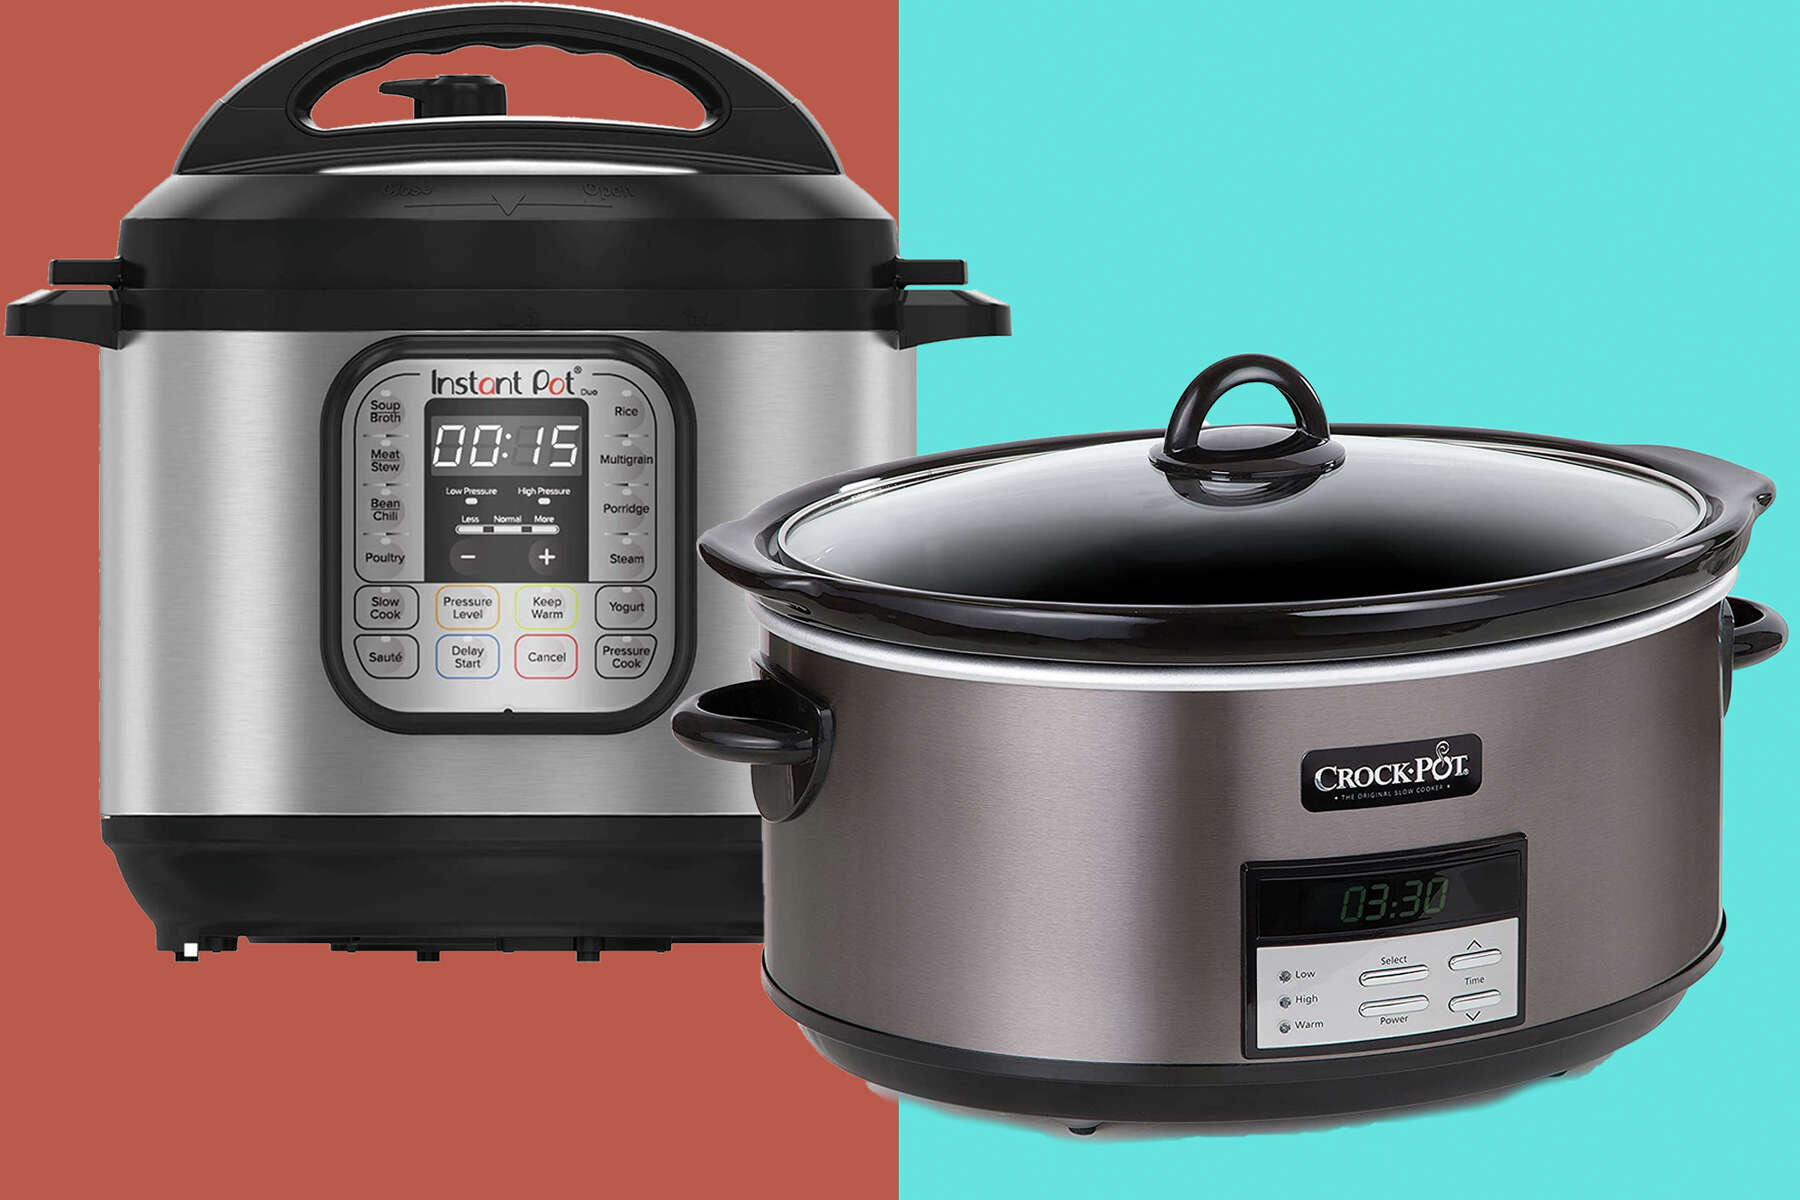 twijfel Voorstel Nationaal What's the difference between a Crockpot and a slow cooker?